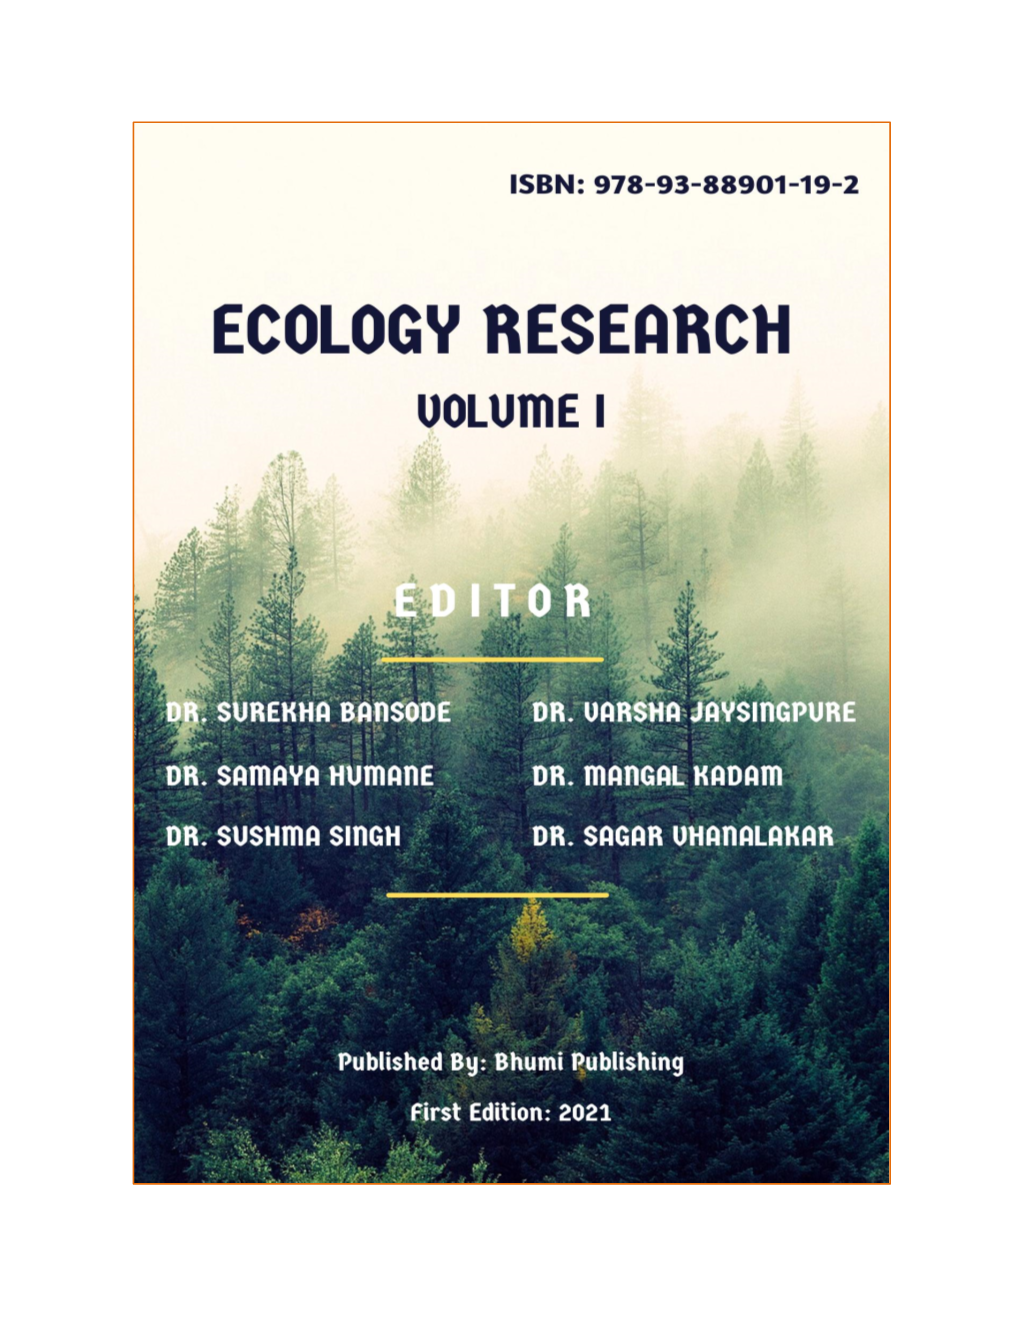 Ecology Research Volume I